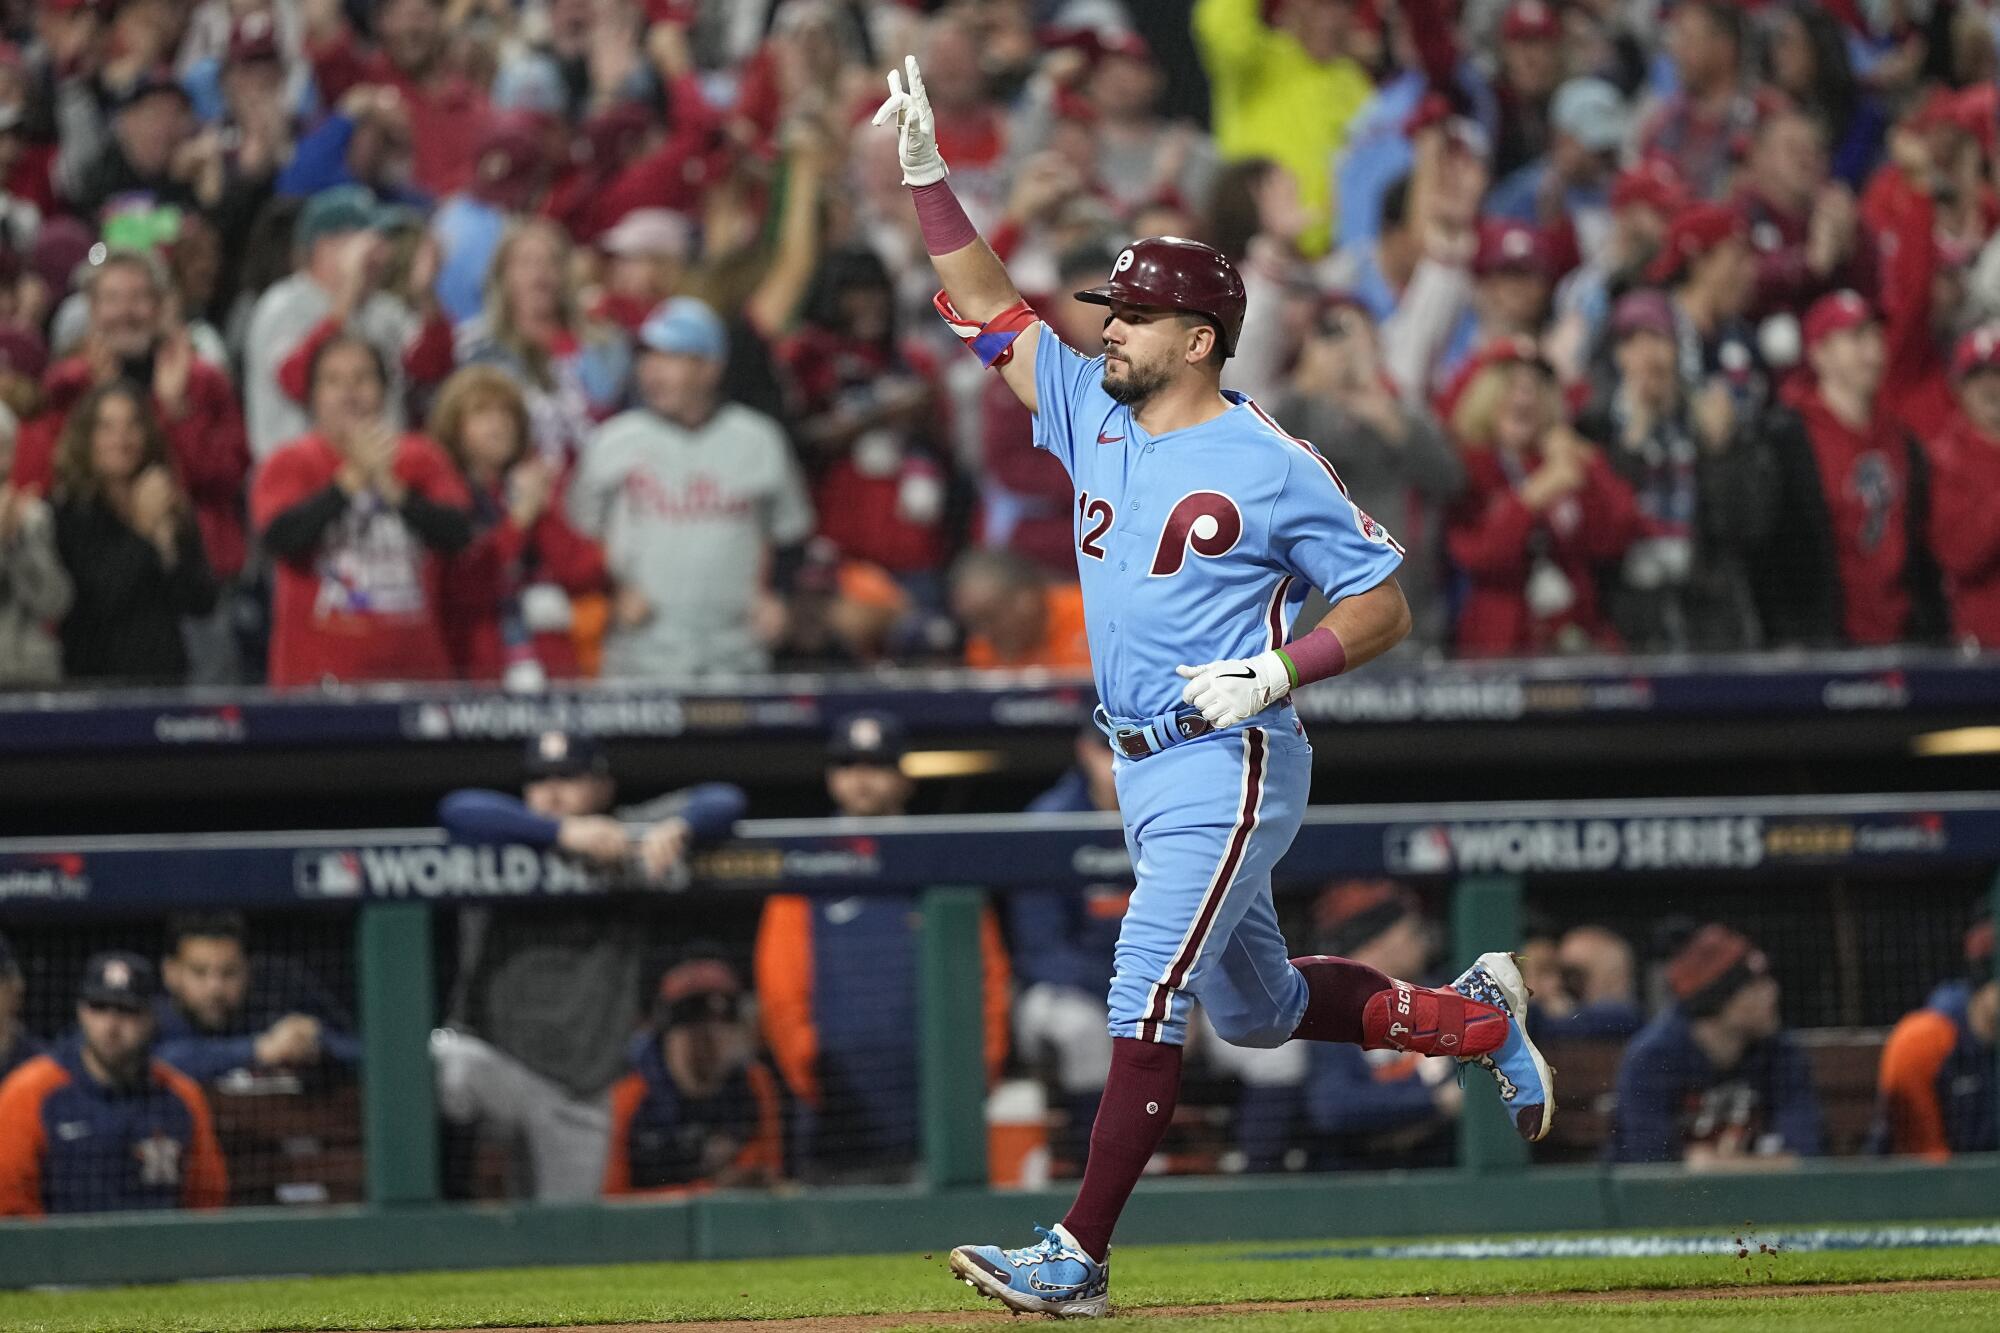 Philadelphia's Kyle Schwarber celebrates after hitting a home run in Game 5 of the World Series.